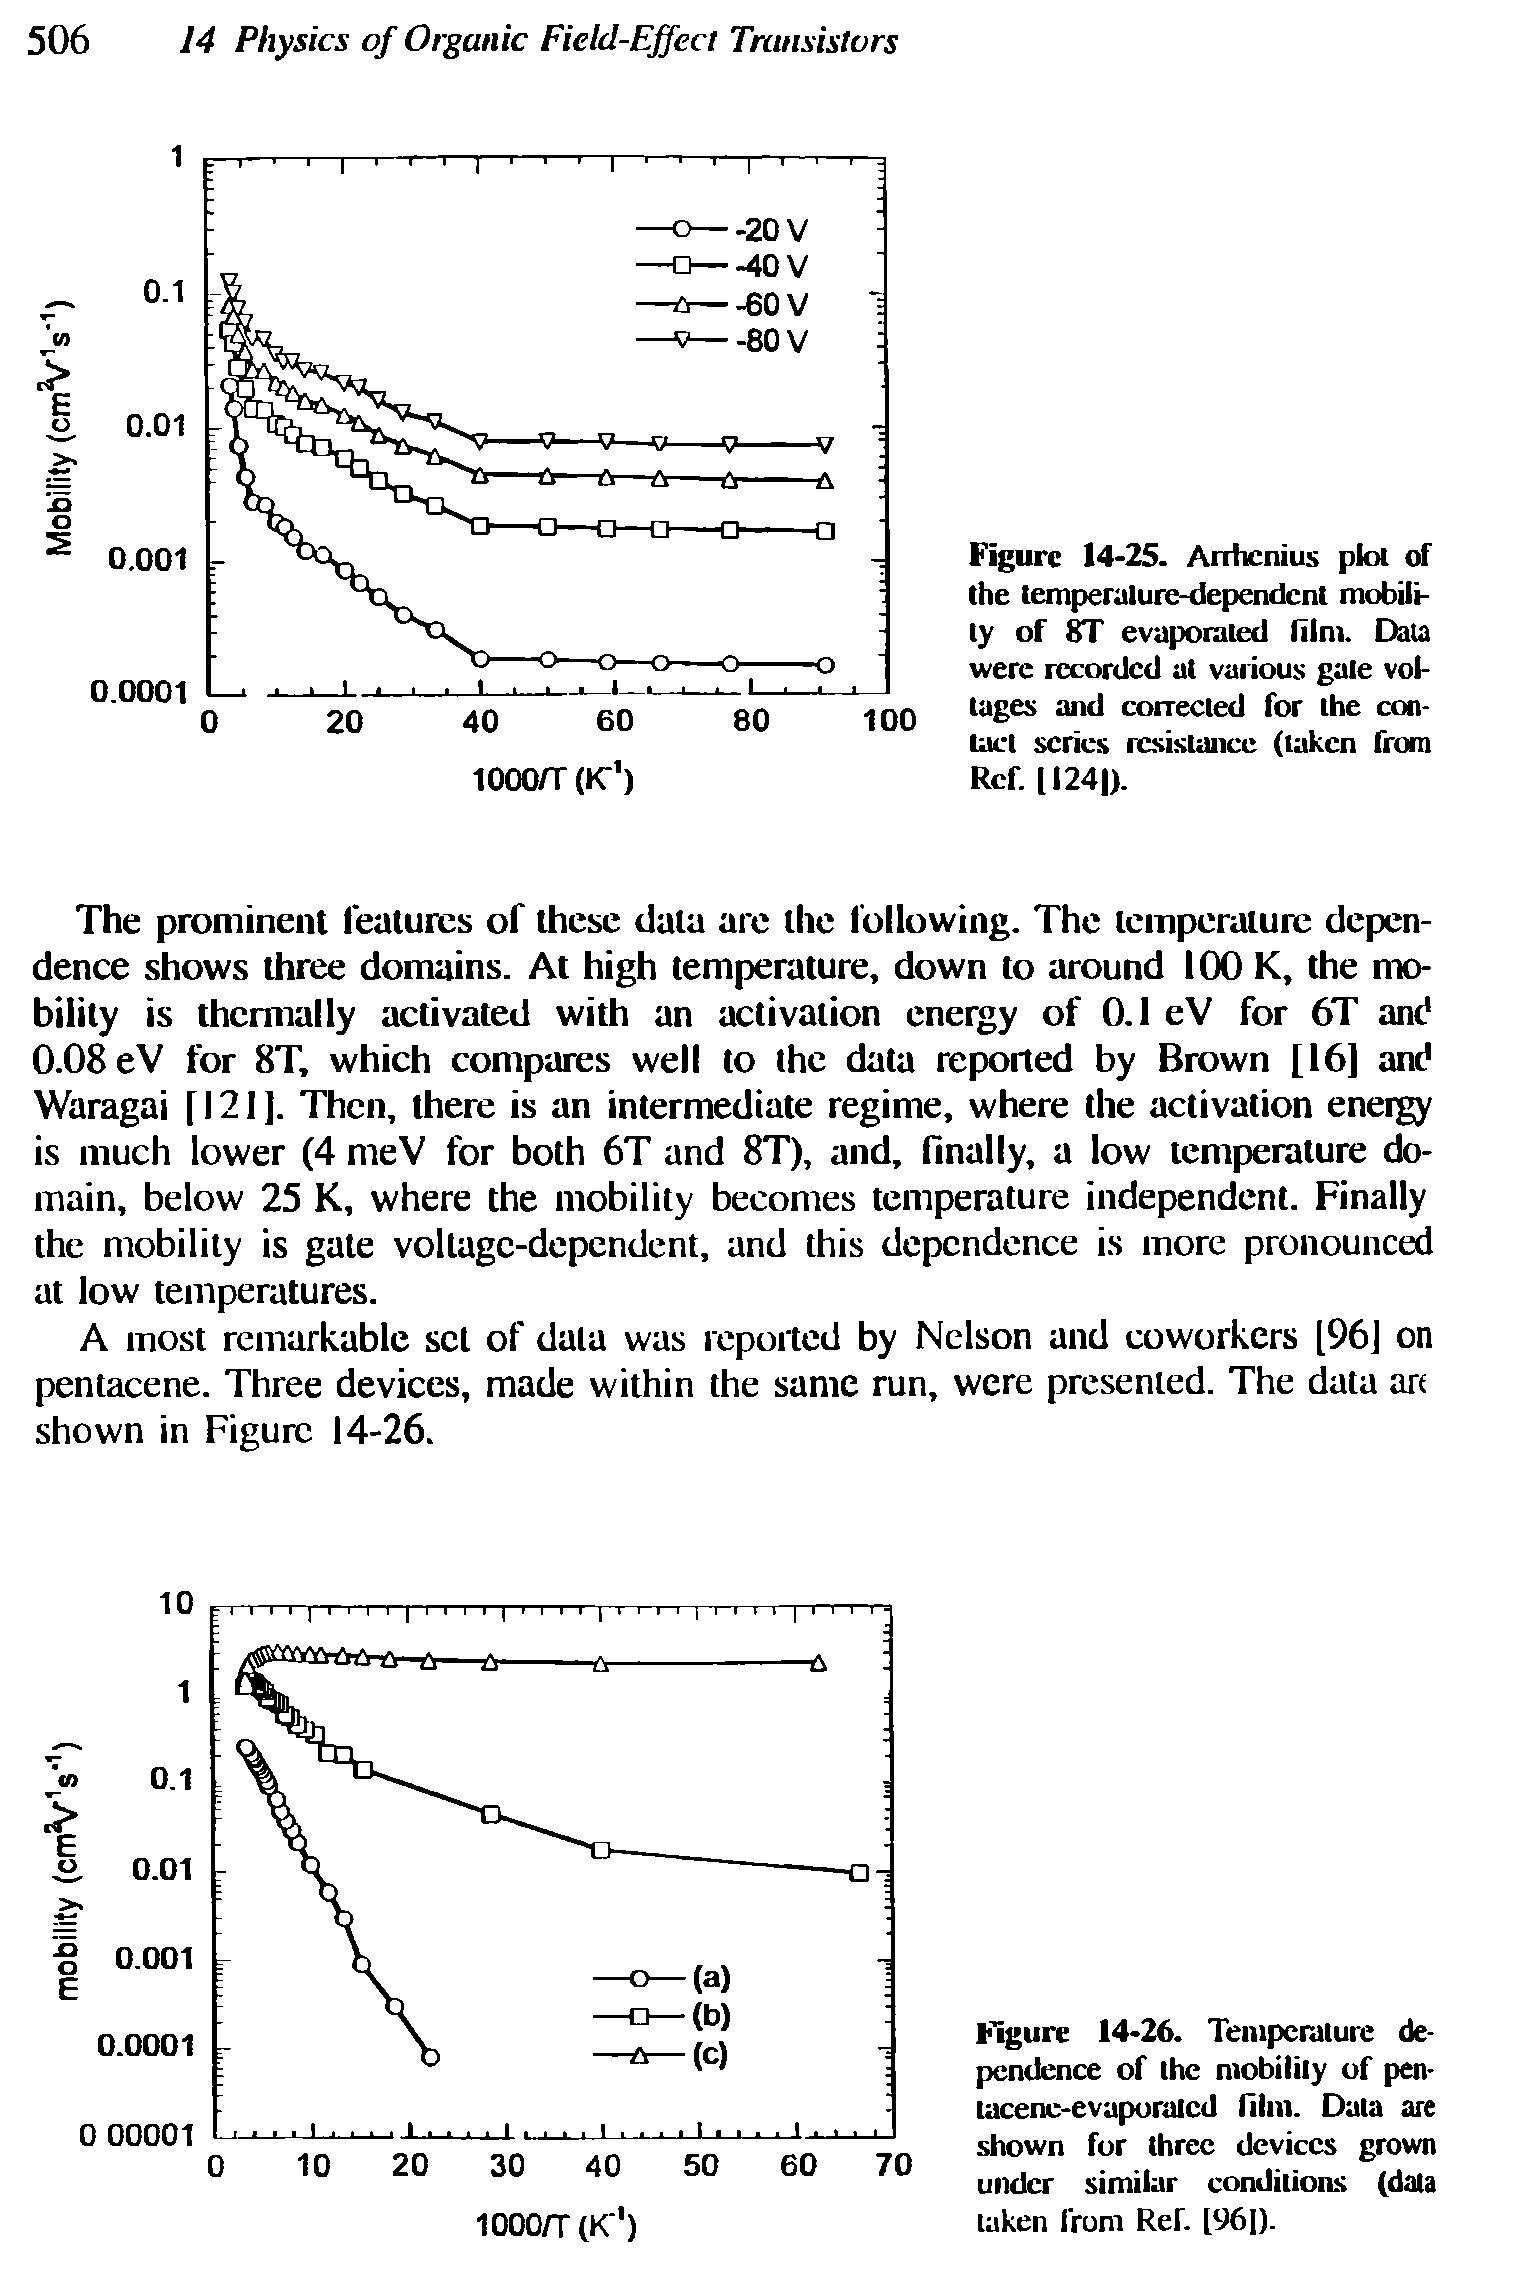 Figure 14-26. Temperature dependence of the mobility of pen-lacenc-evaporalcd film. Data are shown for three devices grown under similar conditions (data taken from Ref. [961).